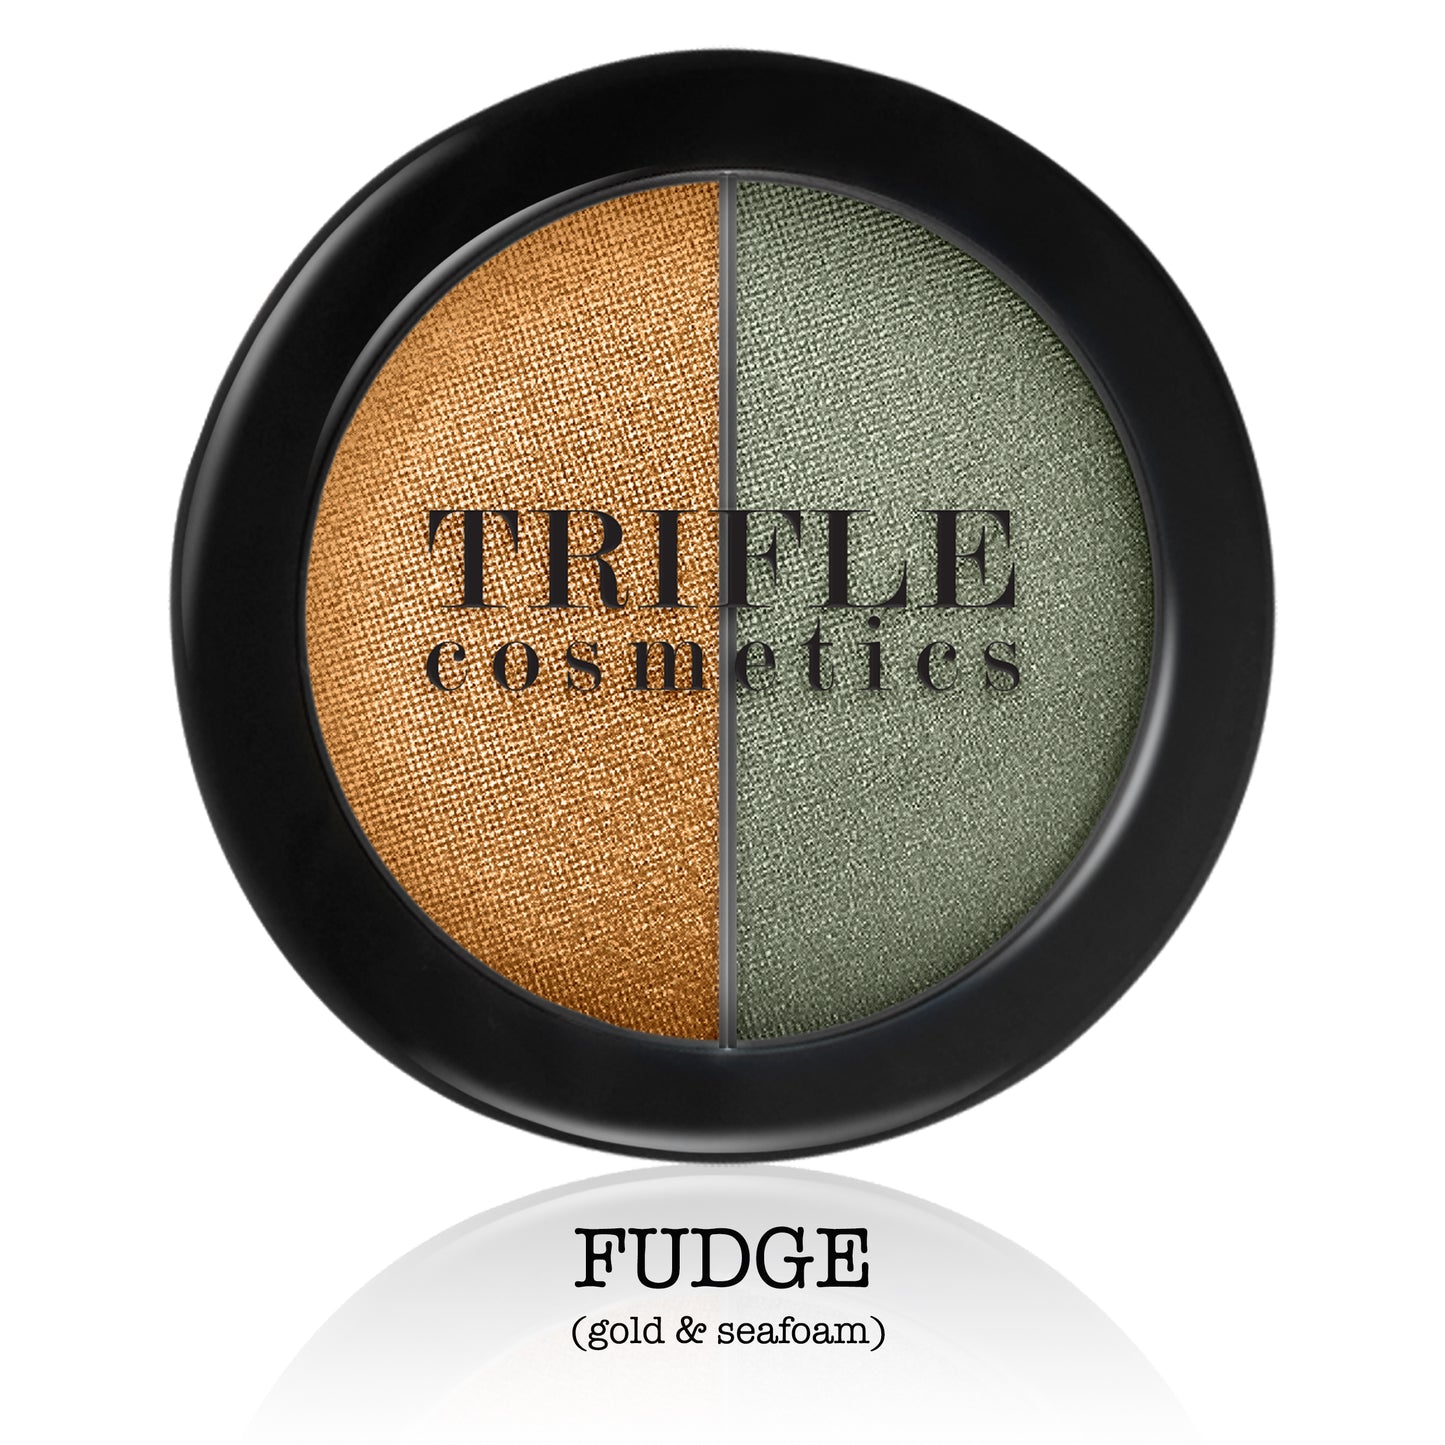 Eye Candy - Highly Pigmented Eye Shadow Duo